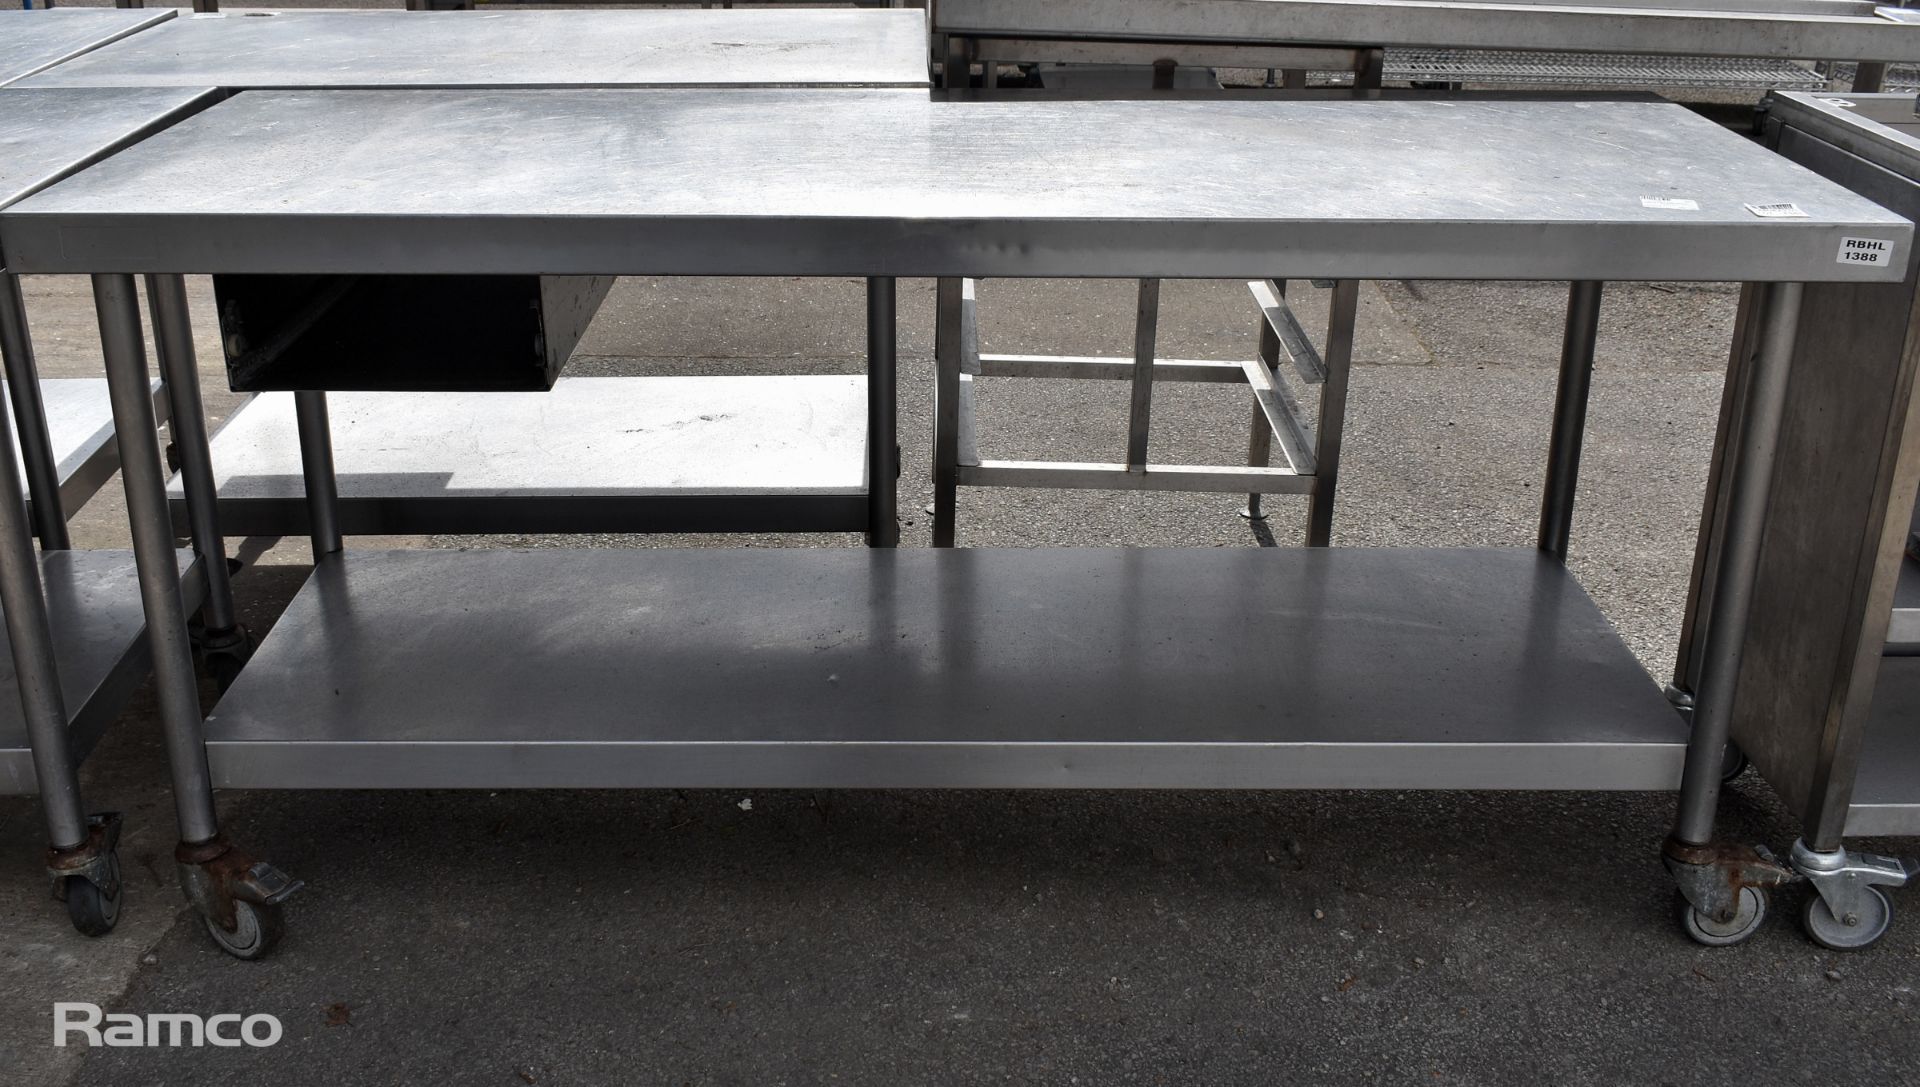 Stainless steel table on castors - W 1800 x D 700 x H 880mm